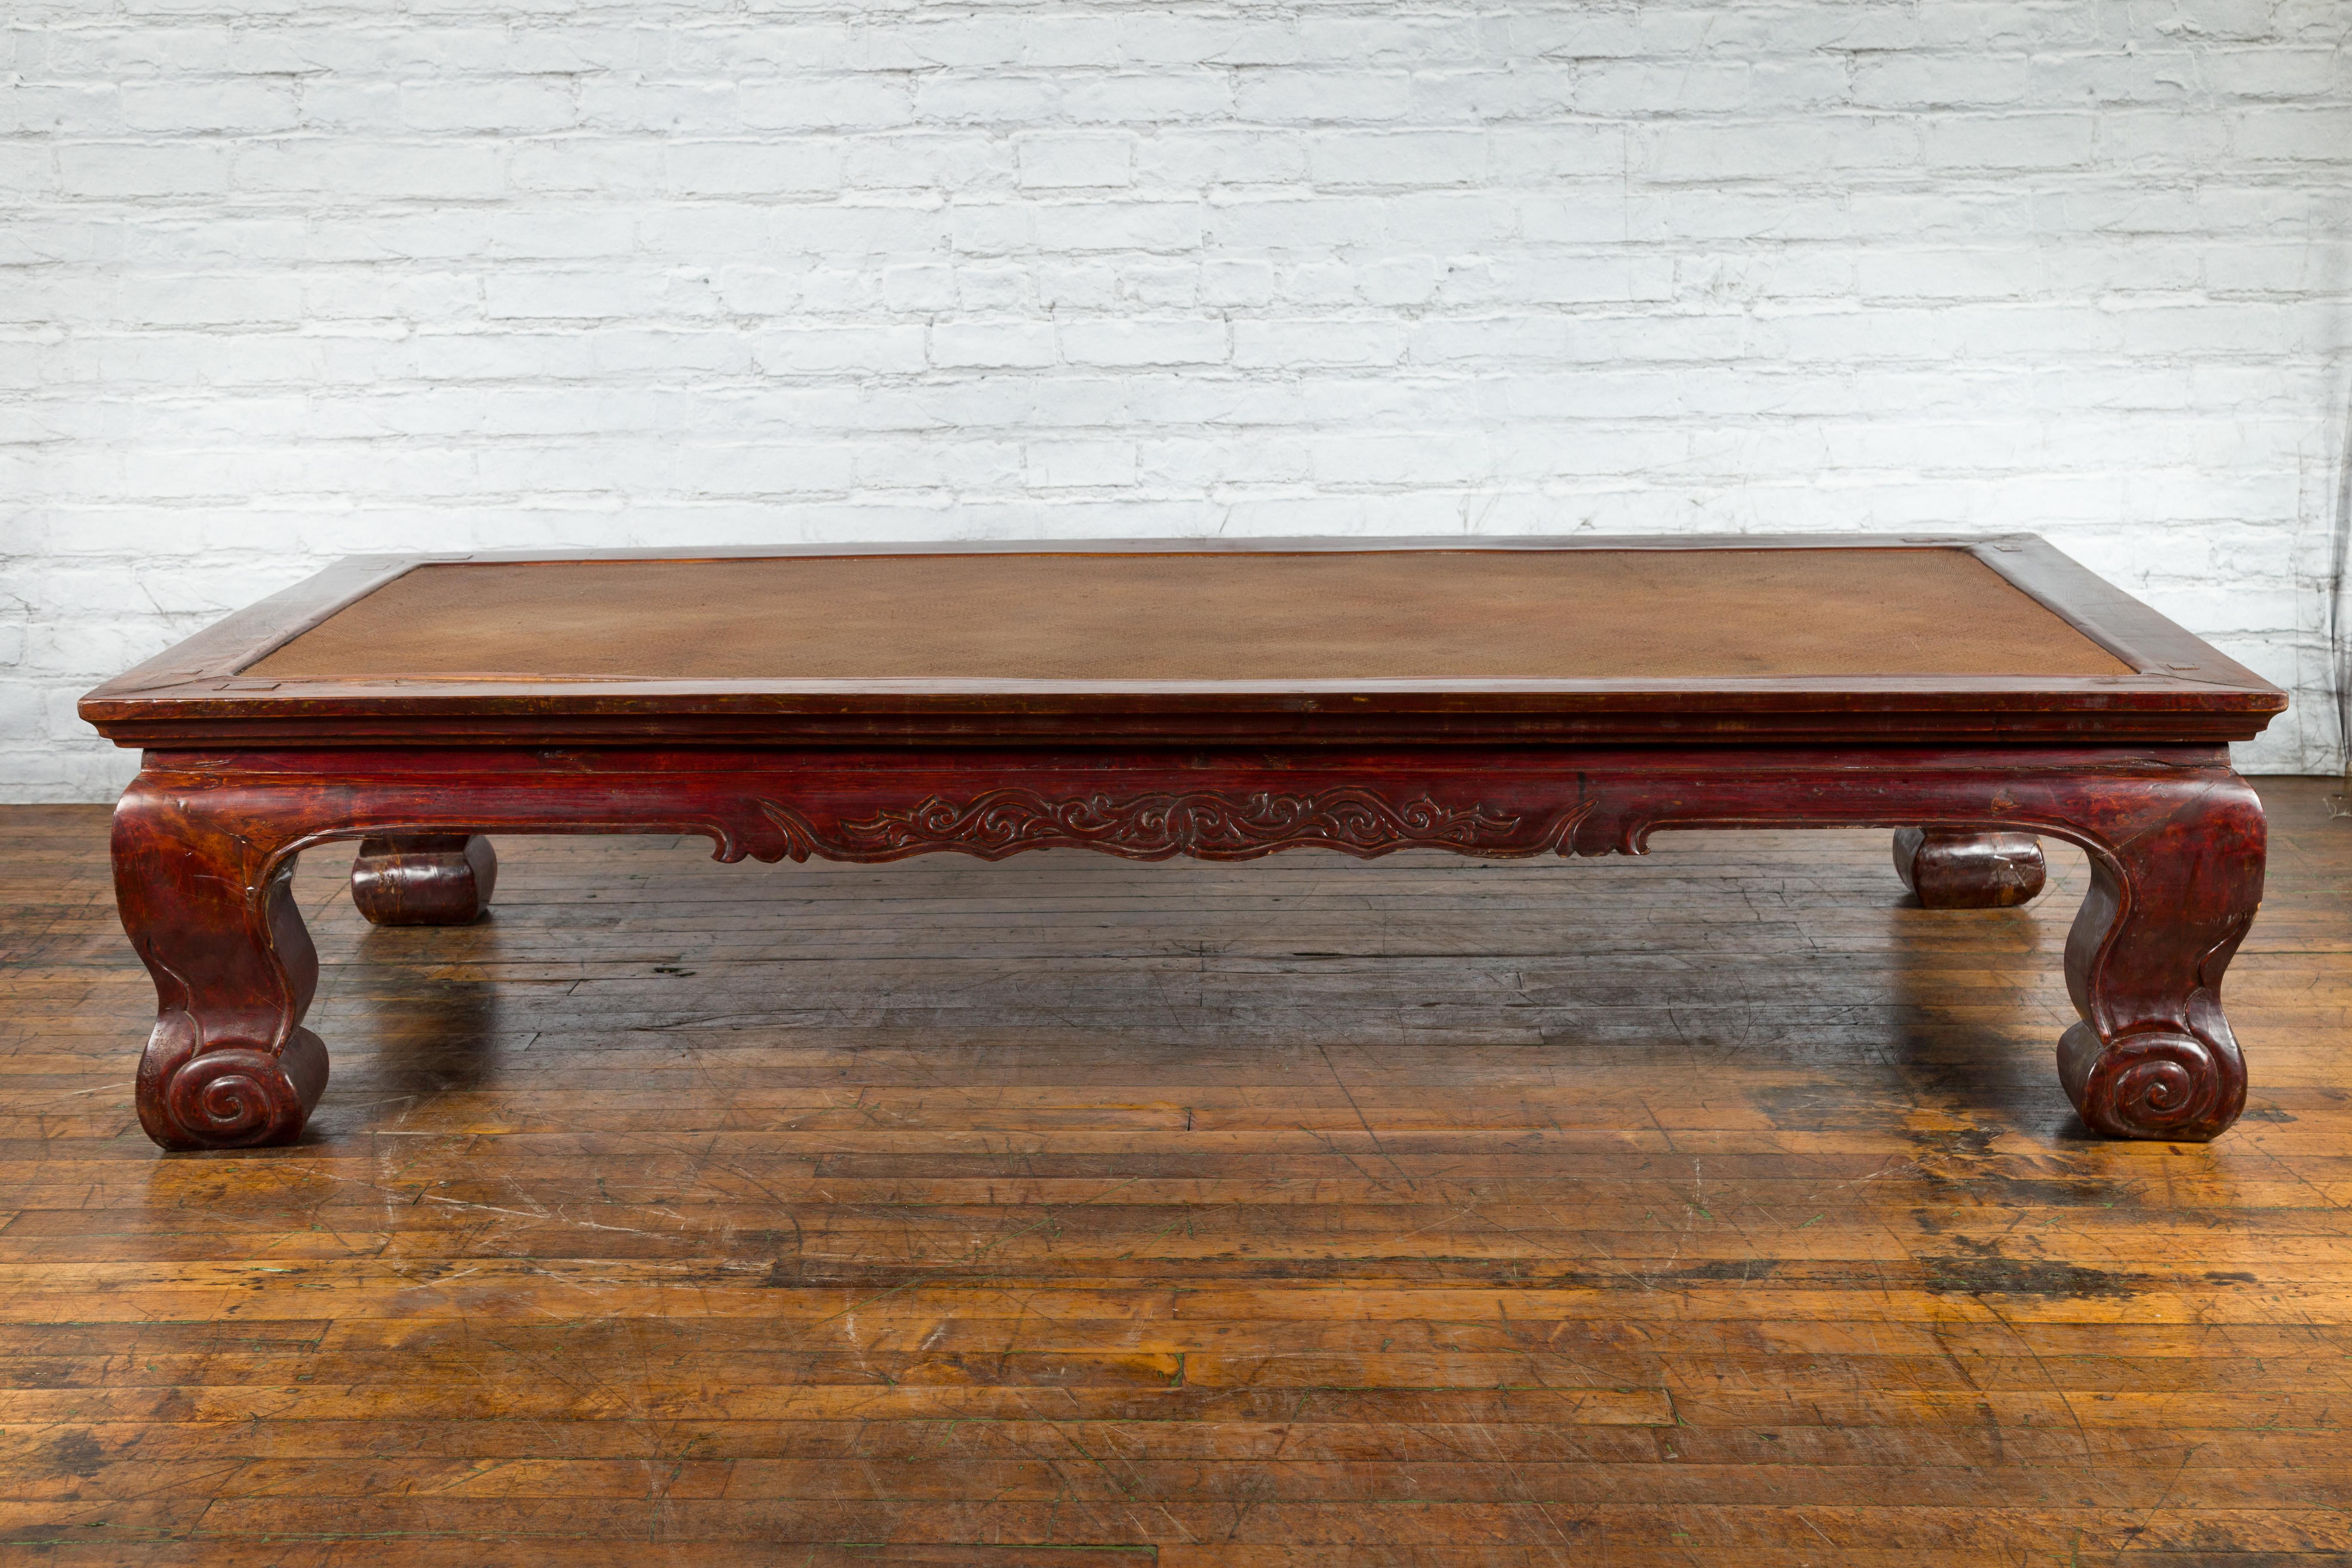 Chinese Qing Dynasty 19th Century Mahogany Stained Coffee Table with Rattan Top In Good Condition For Sale In Yonkers, NY